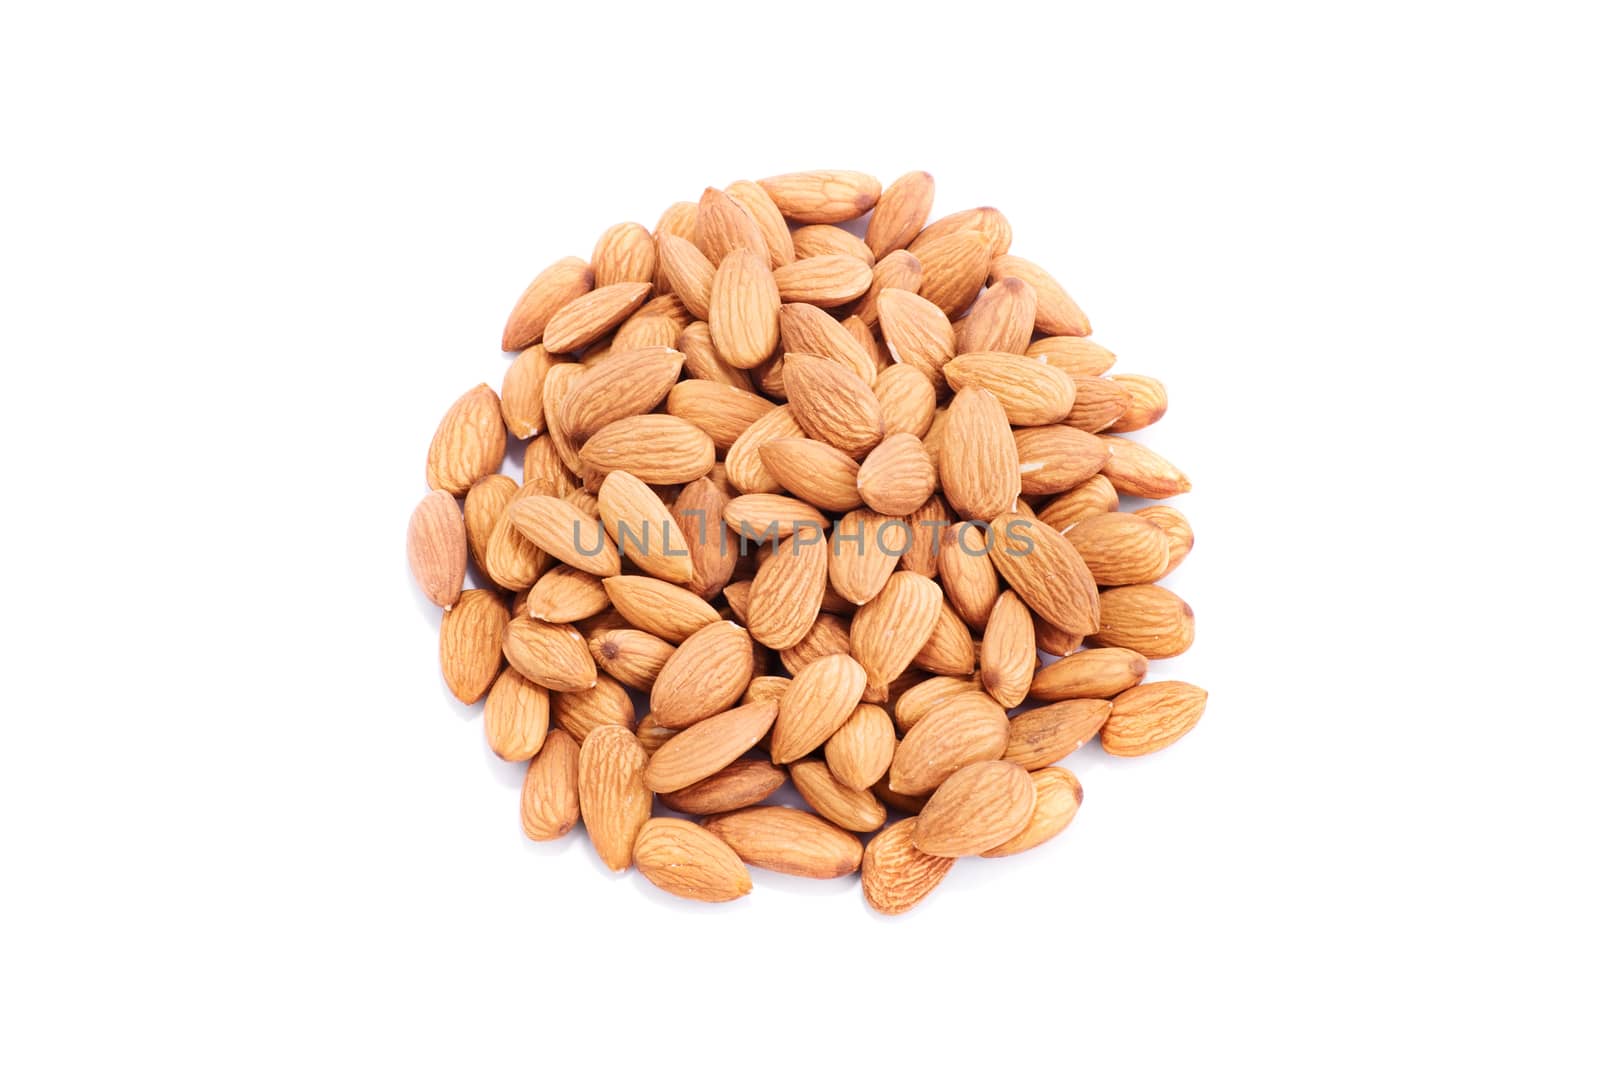 Top view of a heap of almonds, isolated on white background.